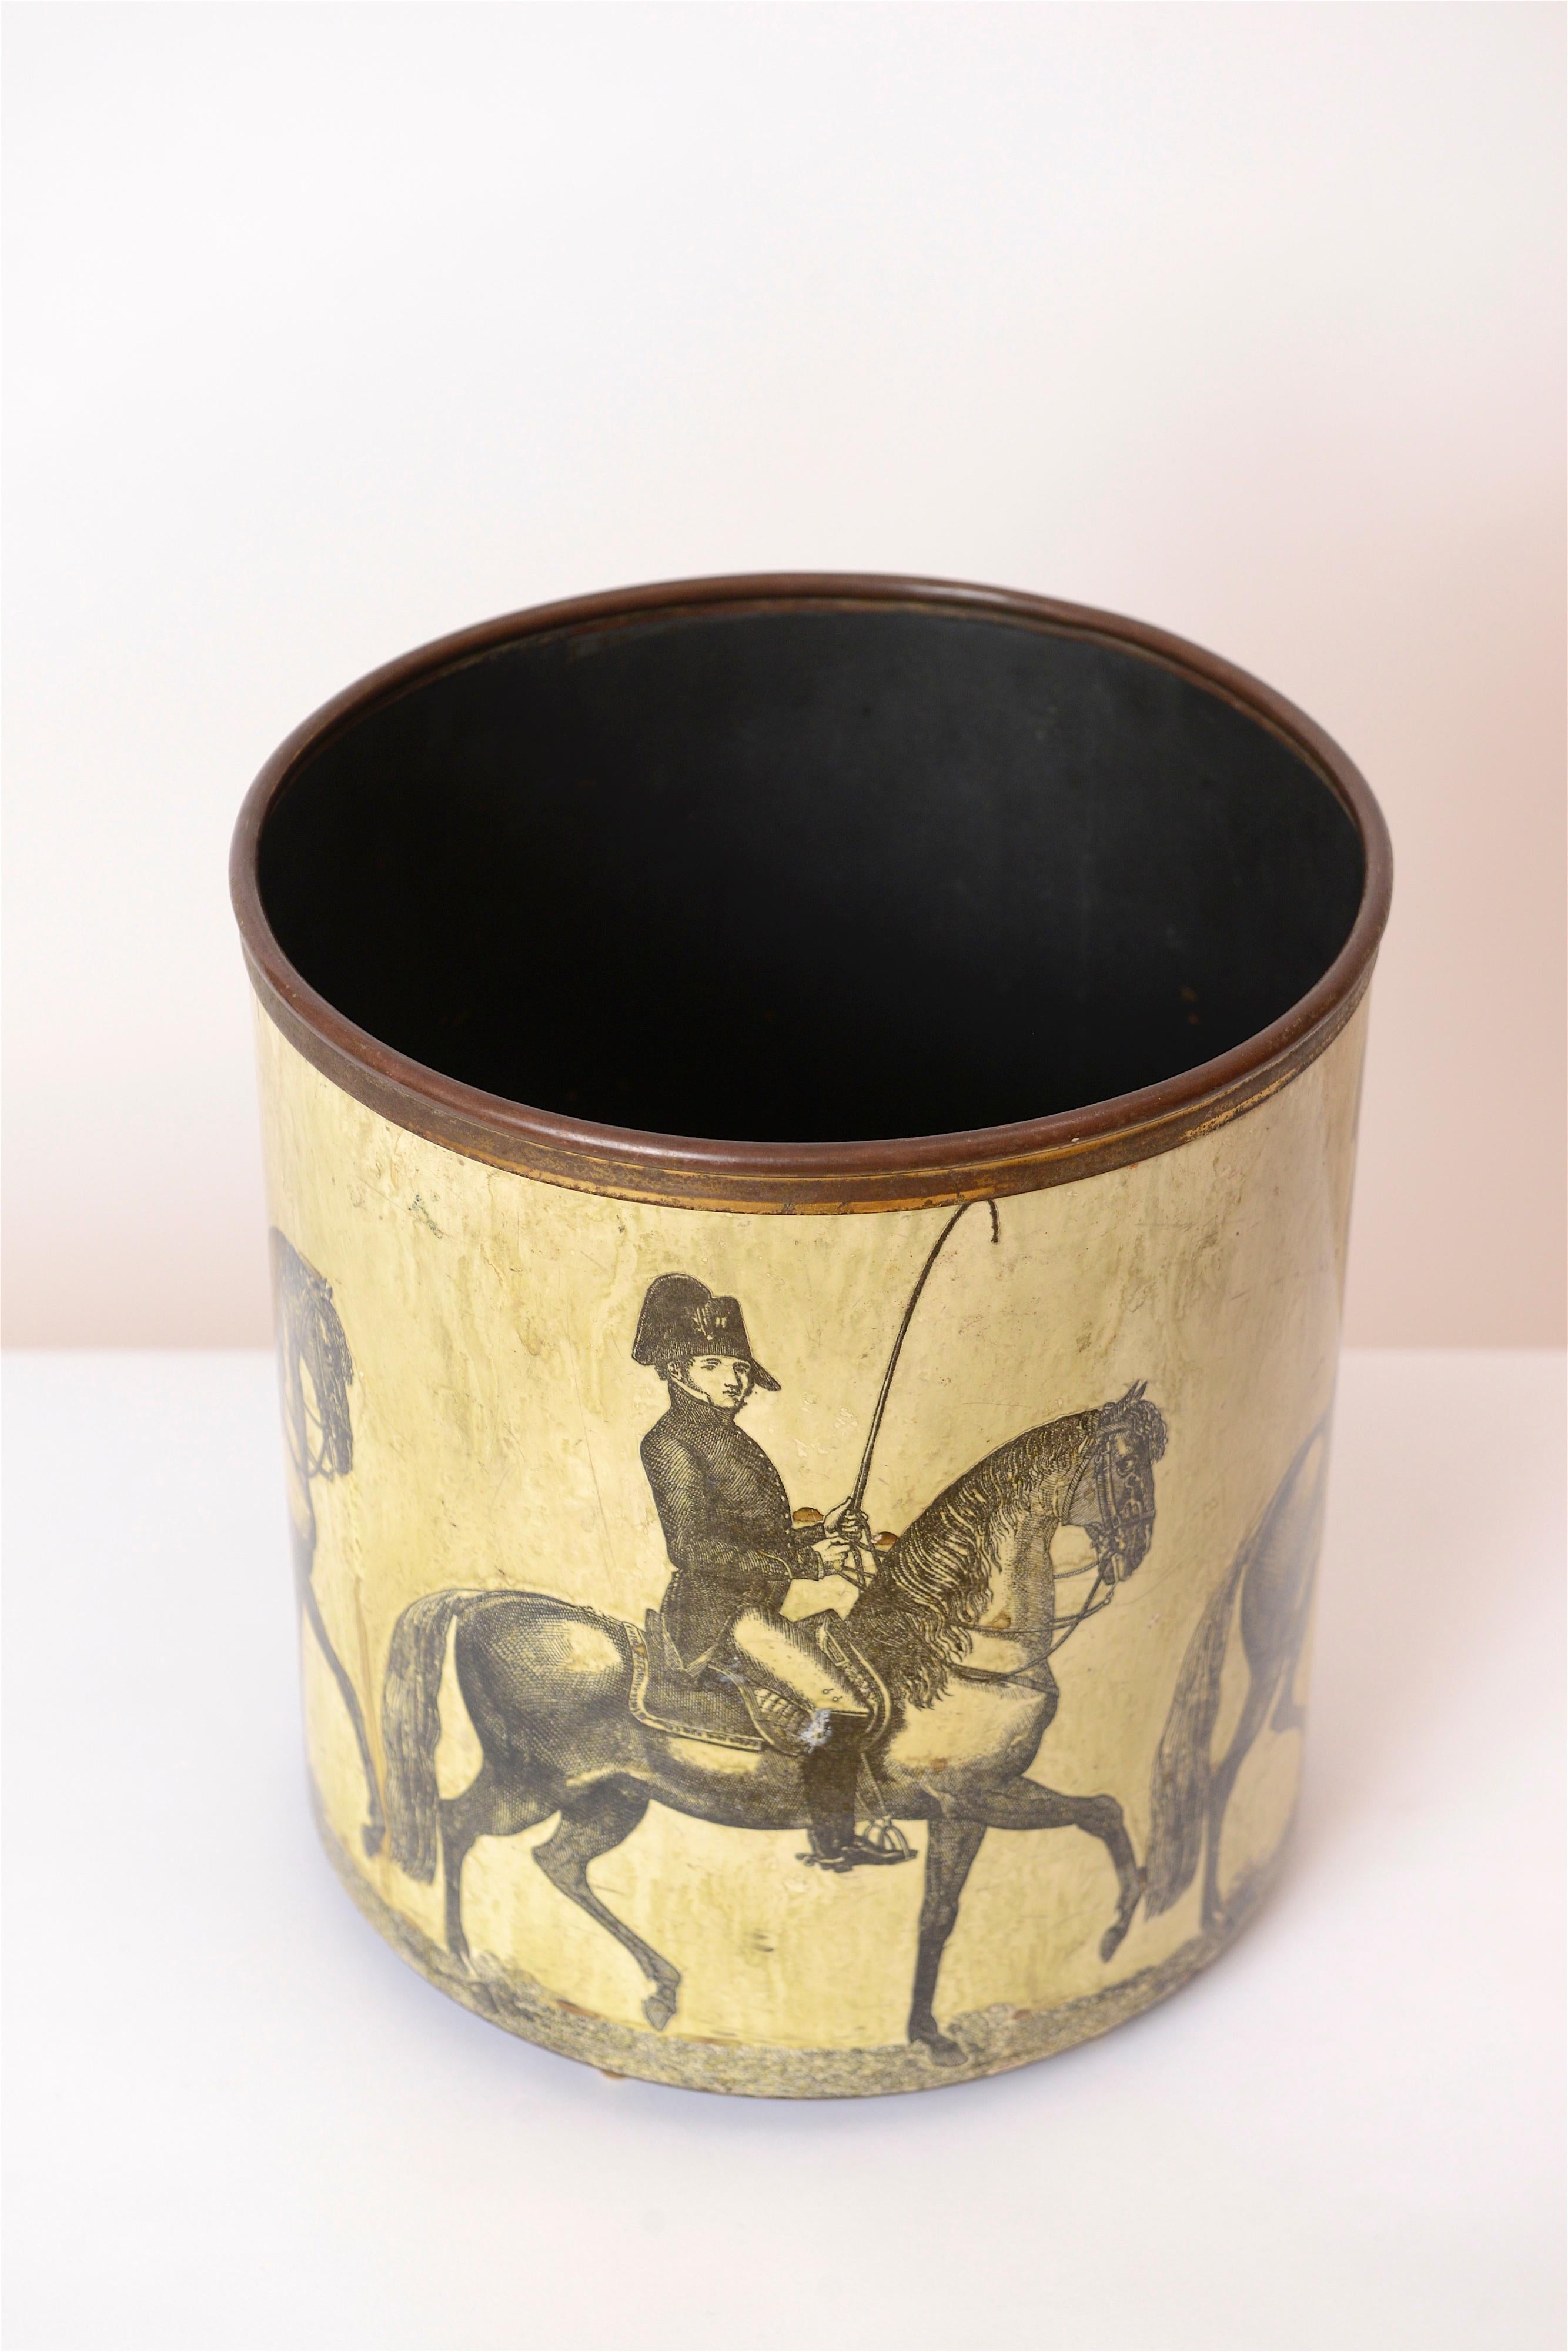 A rare ‘Cavalieri’ design waste paper basket by Piero Fornasetti, Italy, circa 1950. This early ‘Horsemen’ design depicts a uniformed man on horseback with whip. The lacquered hand-colored transfer images, along with the solid brass rim, have a